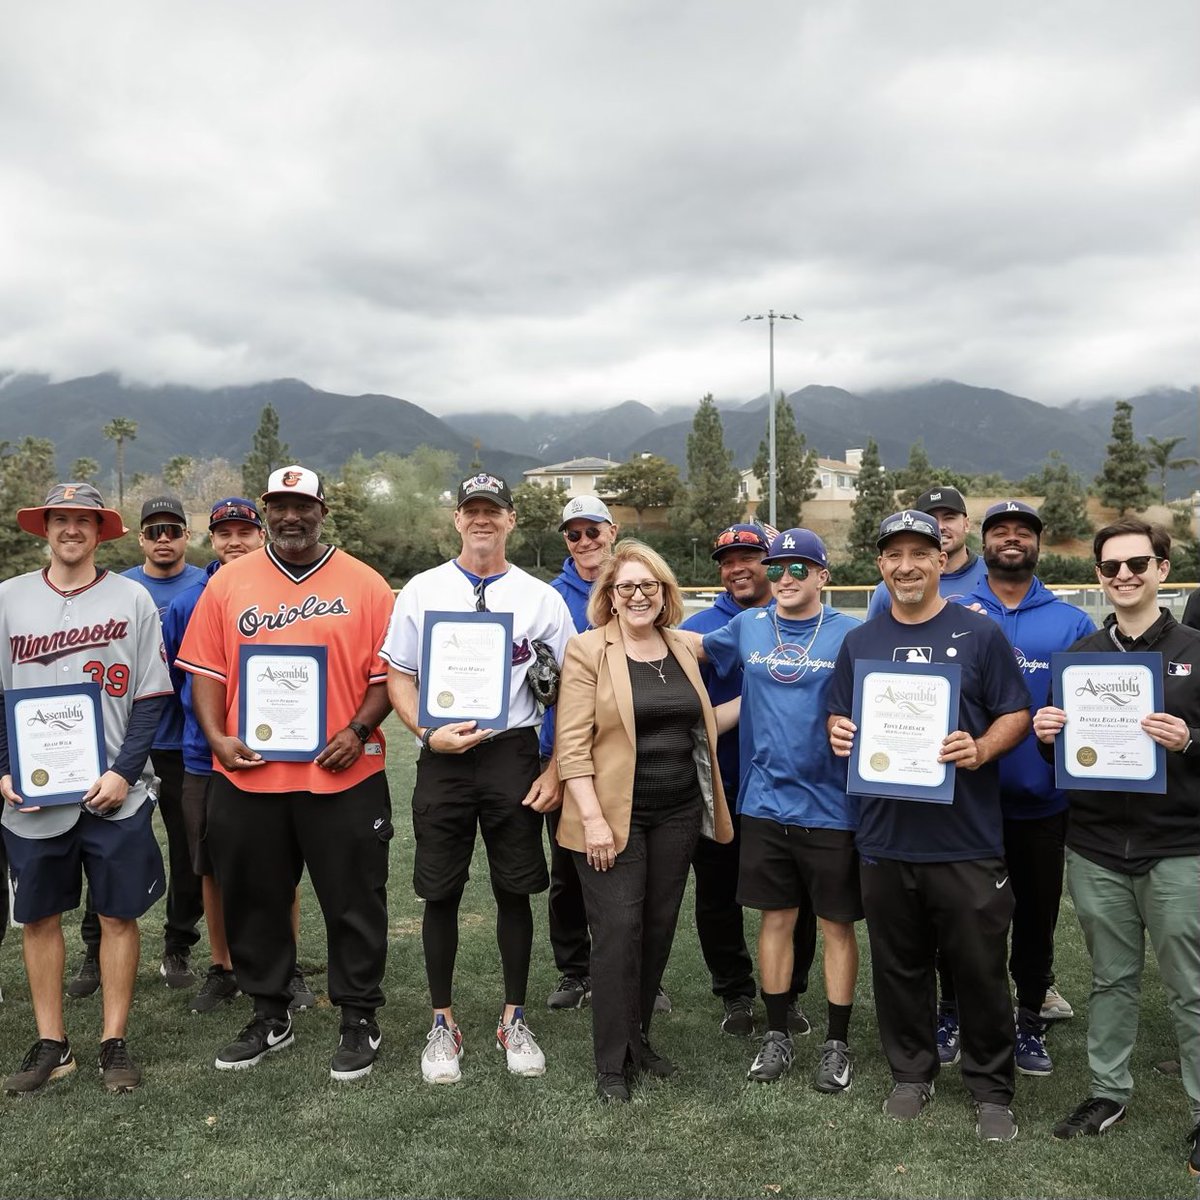 MLB & PLAY BALL stopped by Day Creek Park in Rancho Cucamonga, CA ☀️🙌 Thank you to CA Assembly-member Eloise Gómez Reyes, MLBPAA members, and the SoCal community for joining the fun and PLAYING BALL‼️⚾️